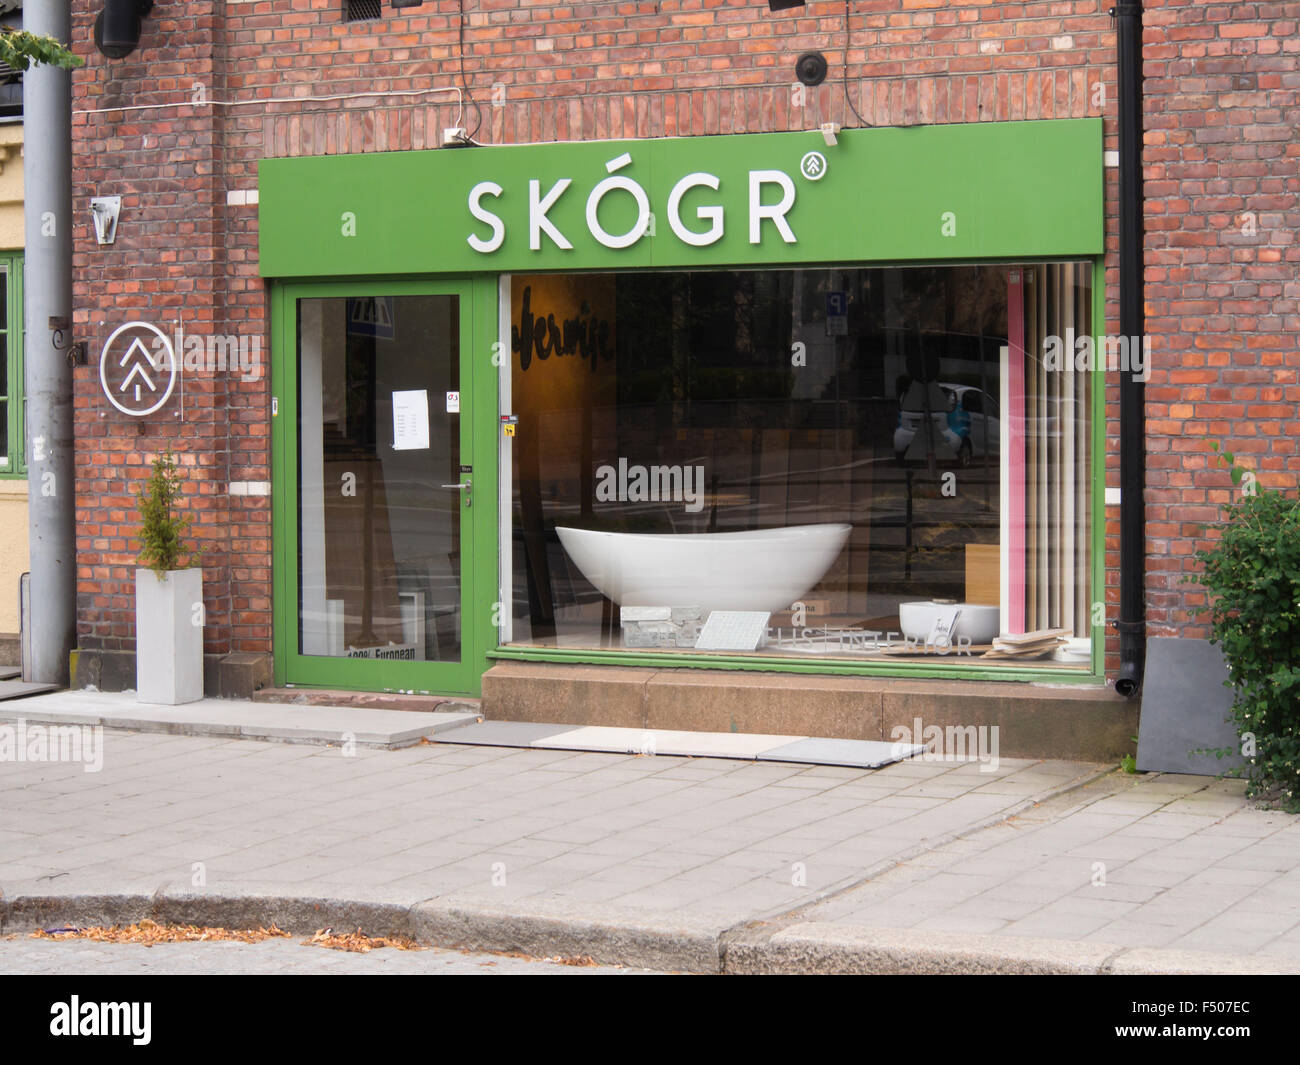 The wealth in Norway give rise to various exclusive interior design shops and brands,here ' Skogr' shop front in Skoyen Oslo Stock Photo